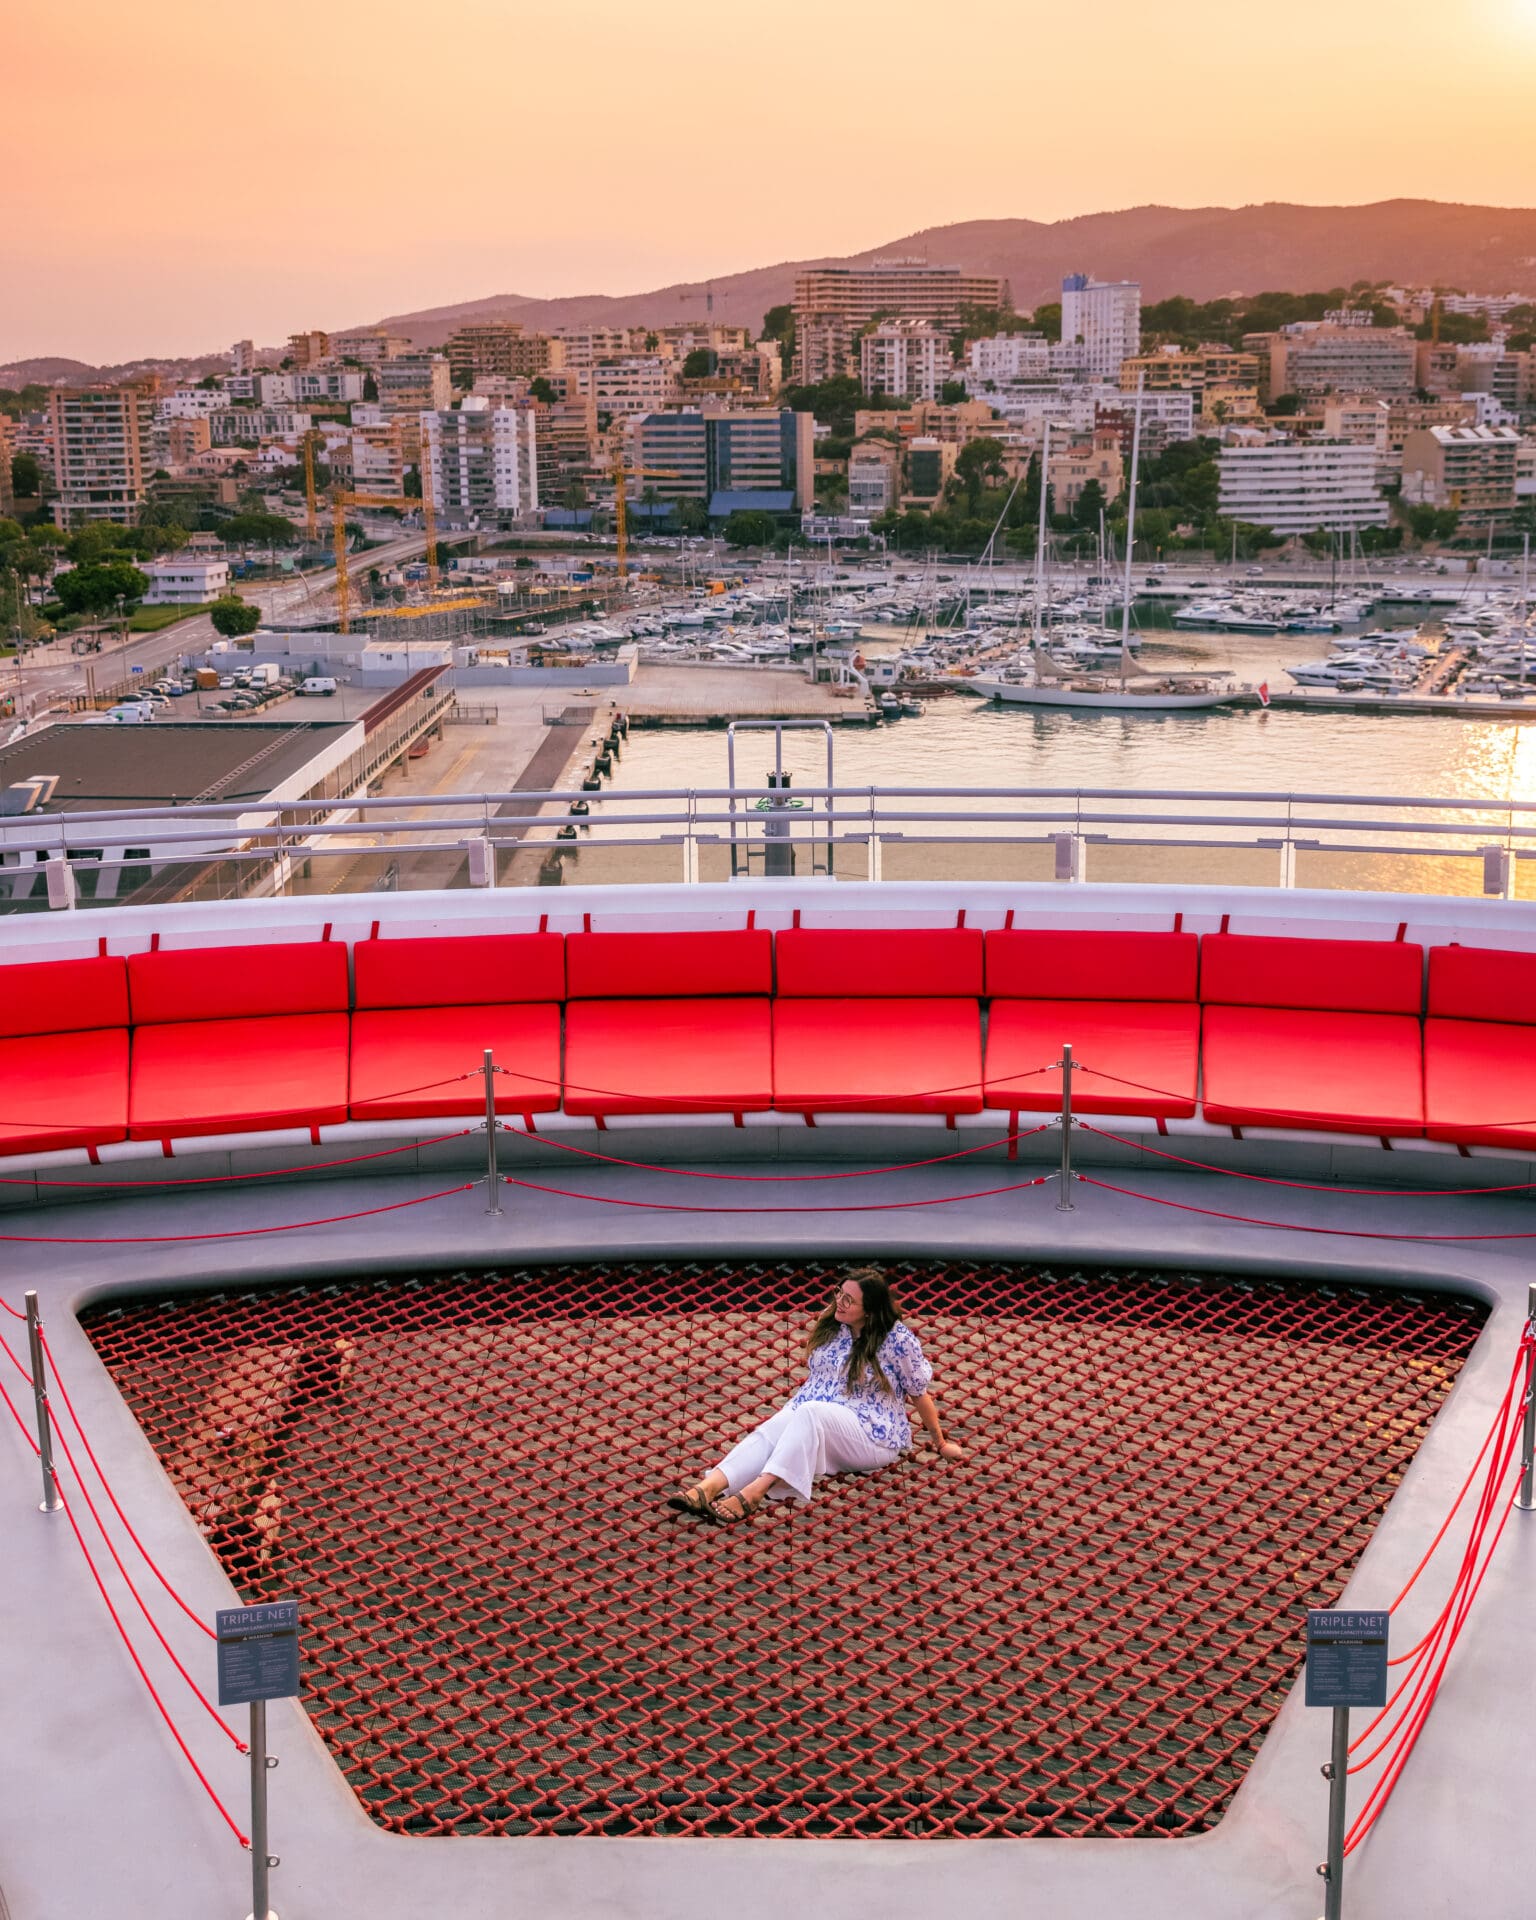 Sitting on The Net on the back of a Virgin Voyages ship at port in Mallorca